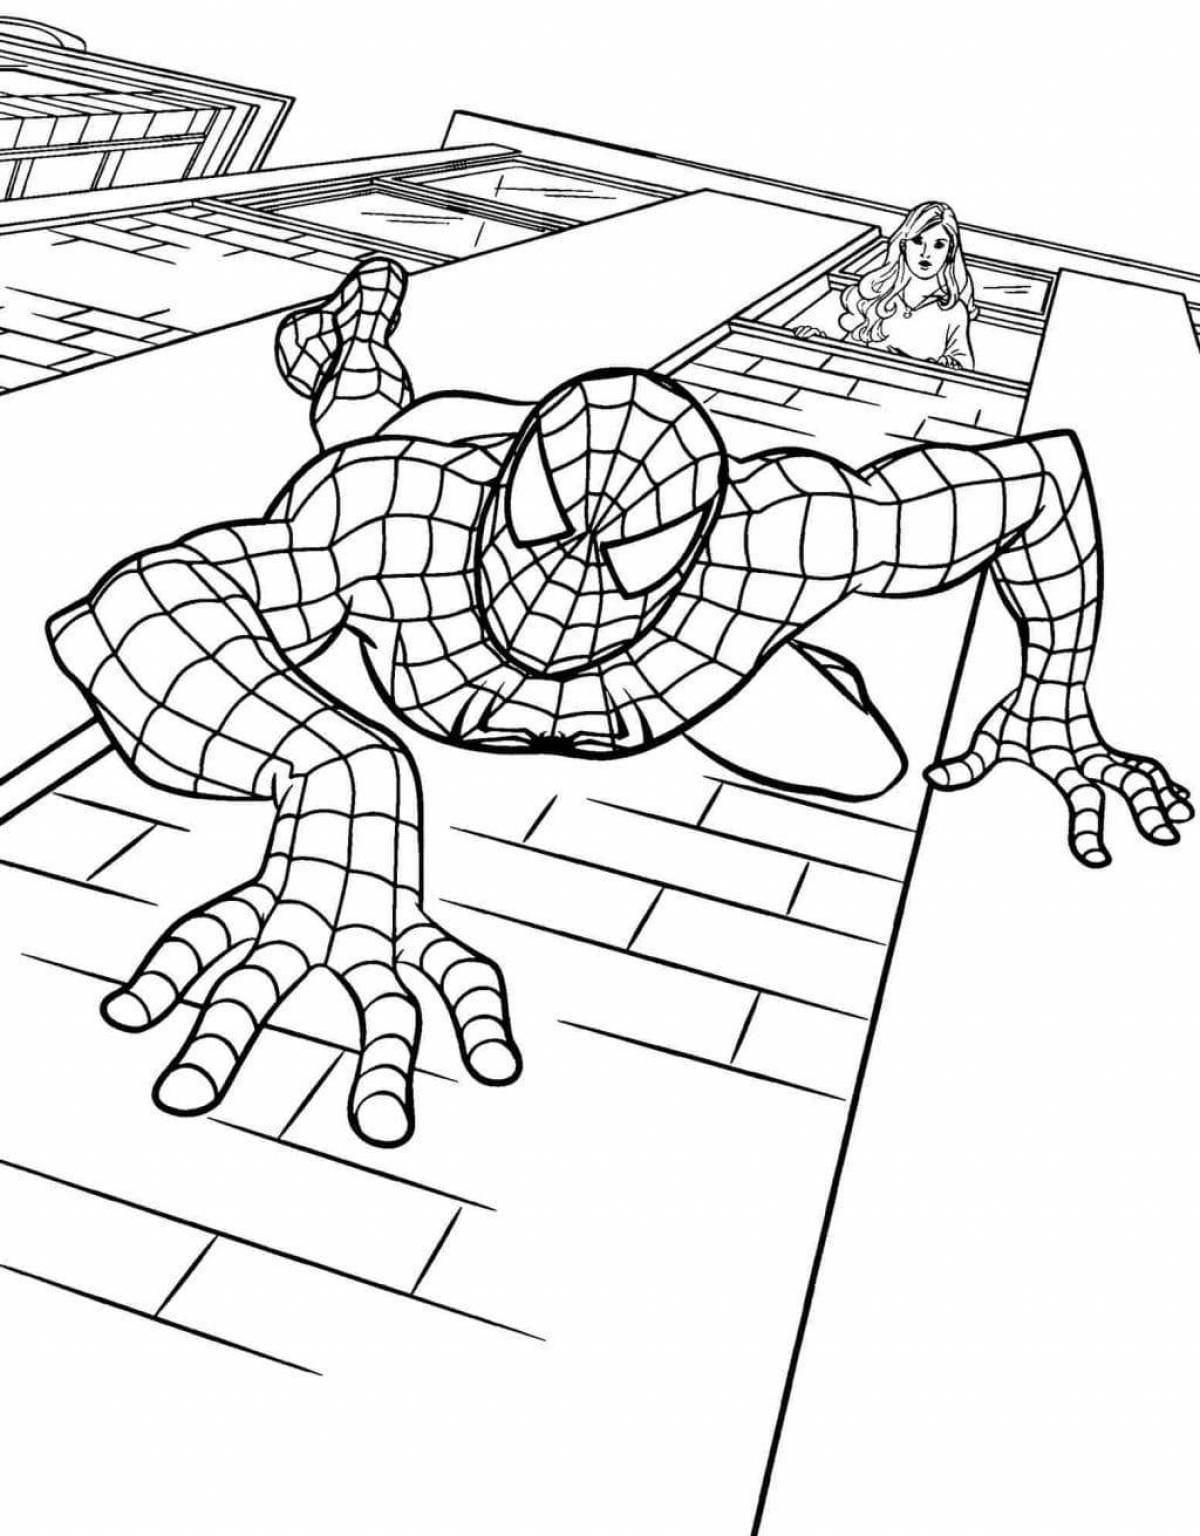 Spider-man luxury coloring book